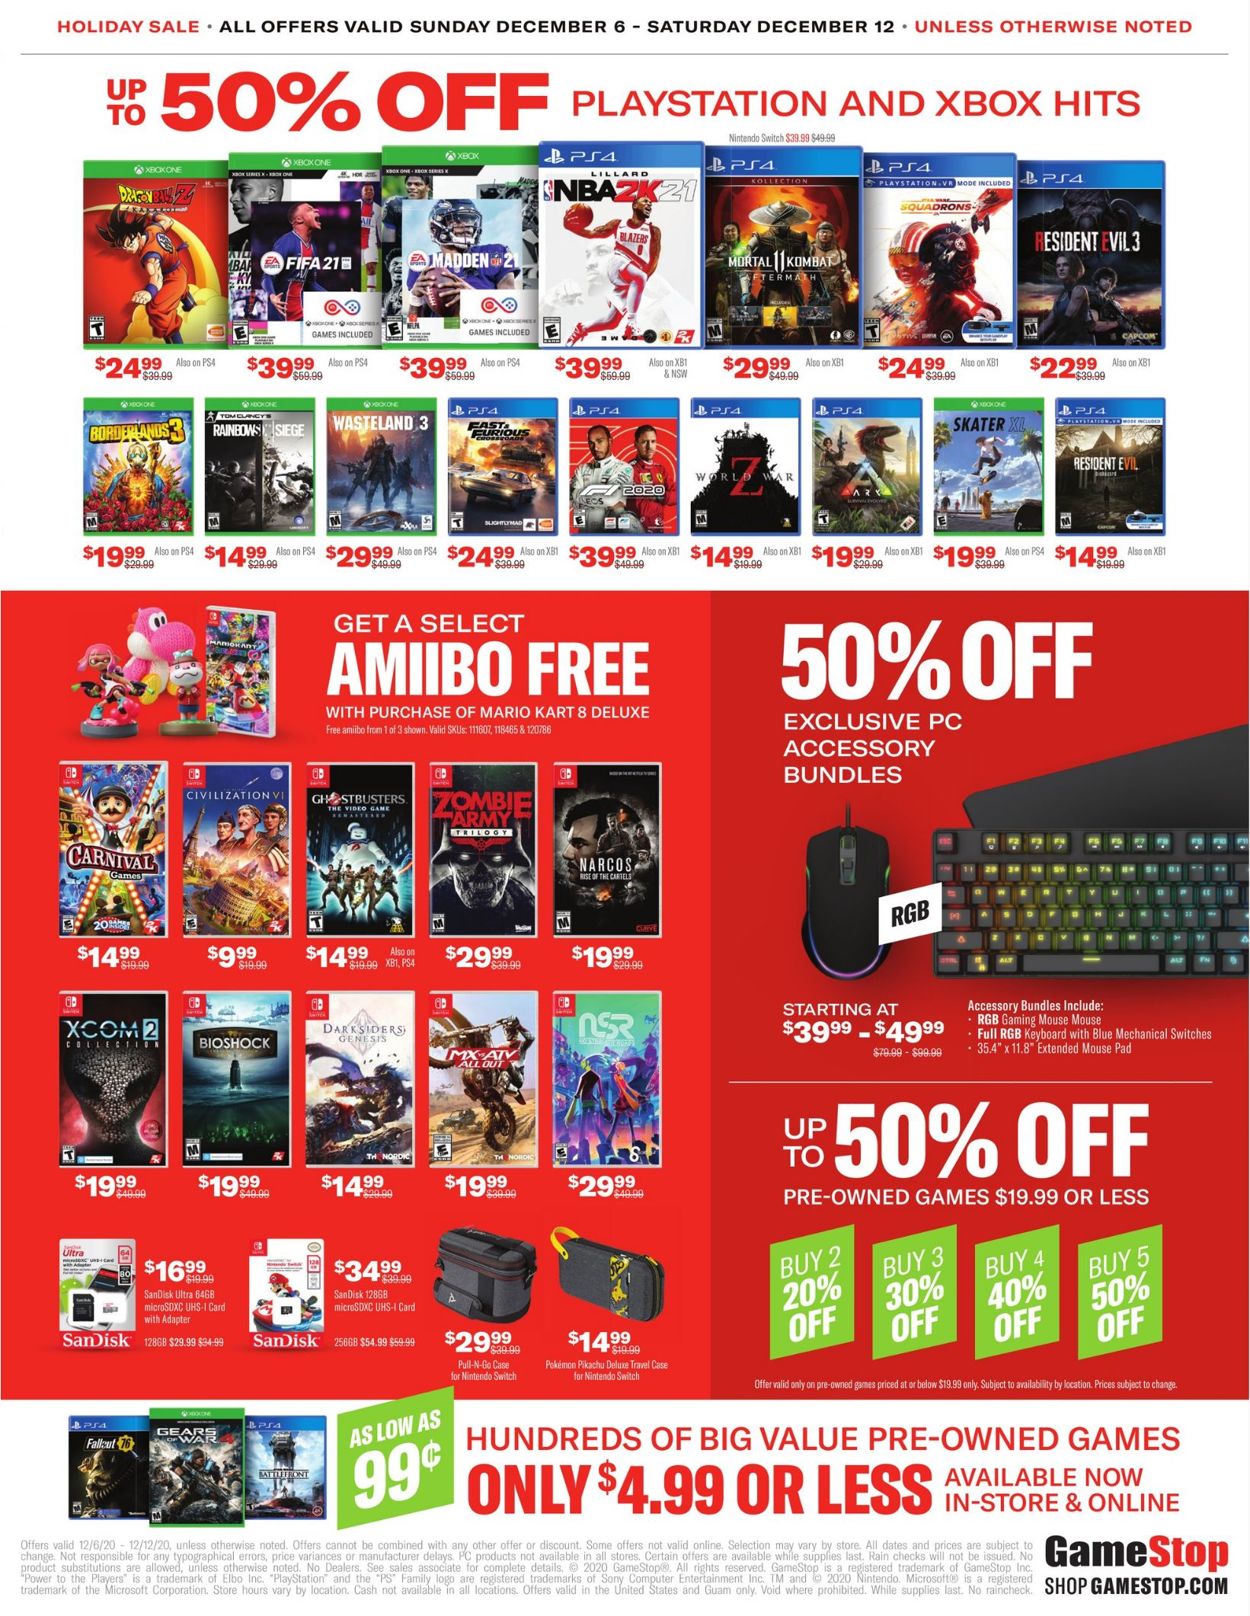 Game Stop Current weekly ad 12/06 - 12/12/2020 [2] - frequent-ads.com